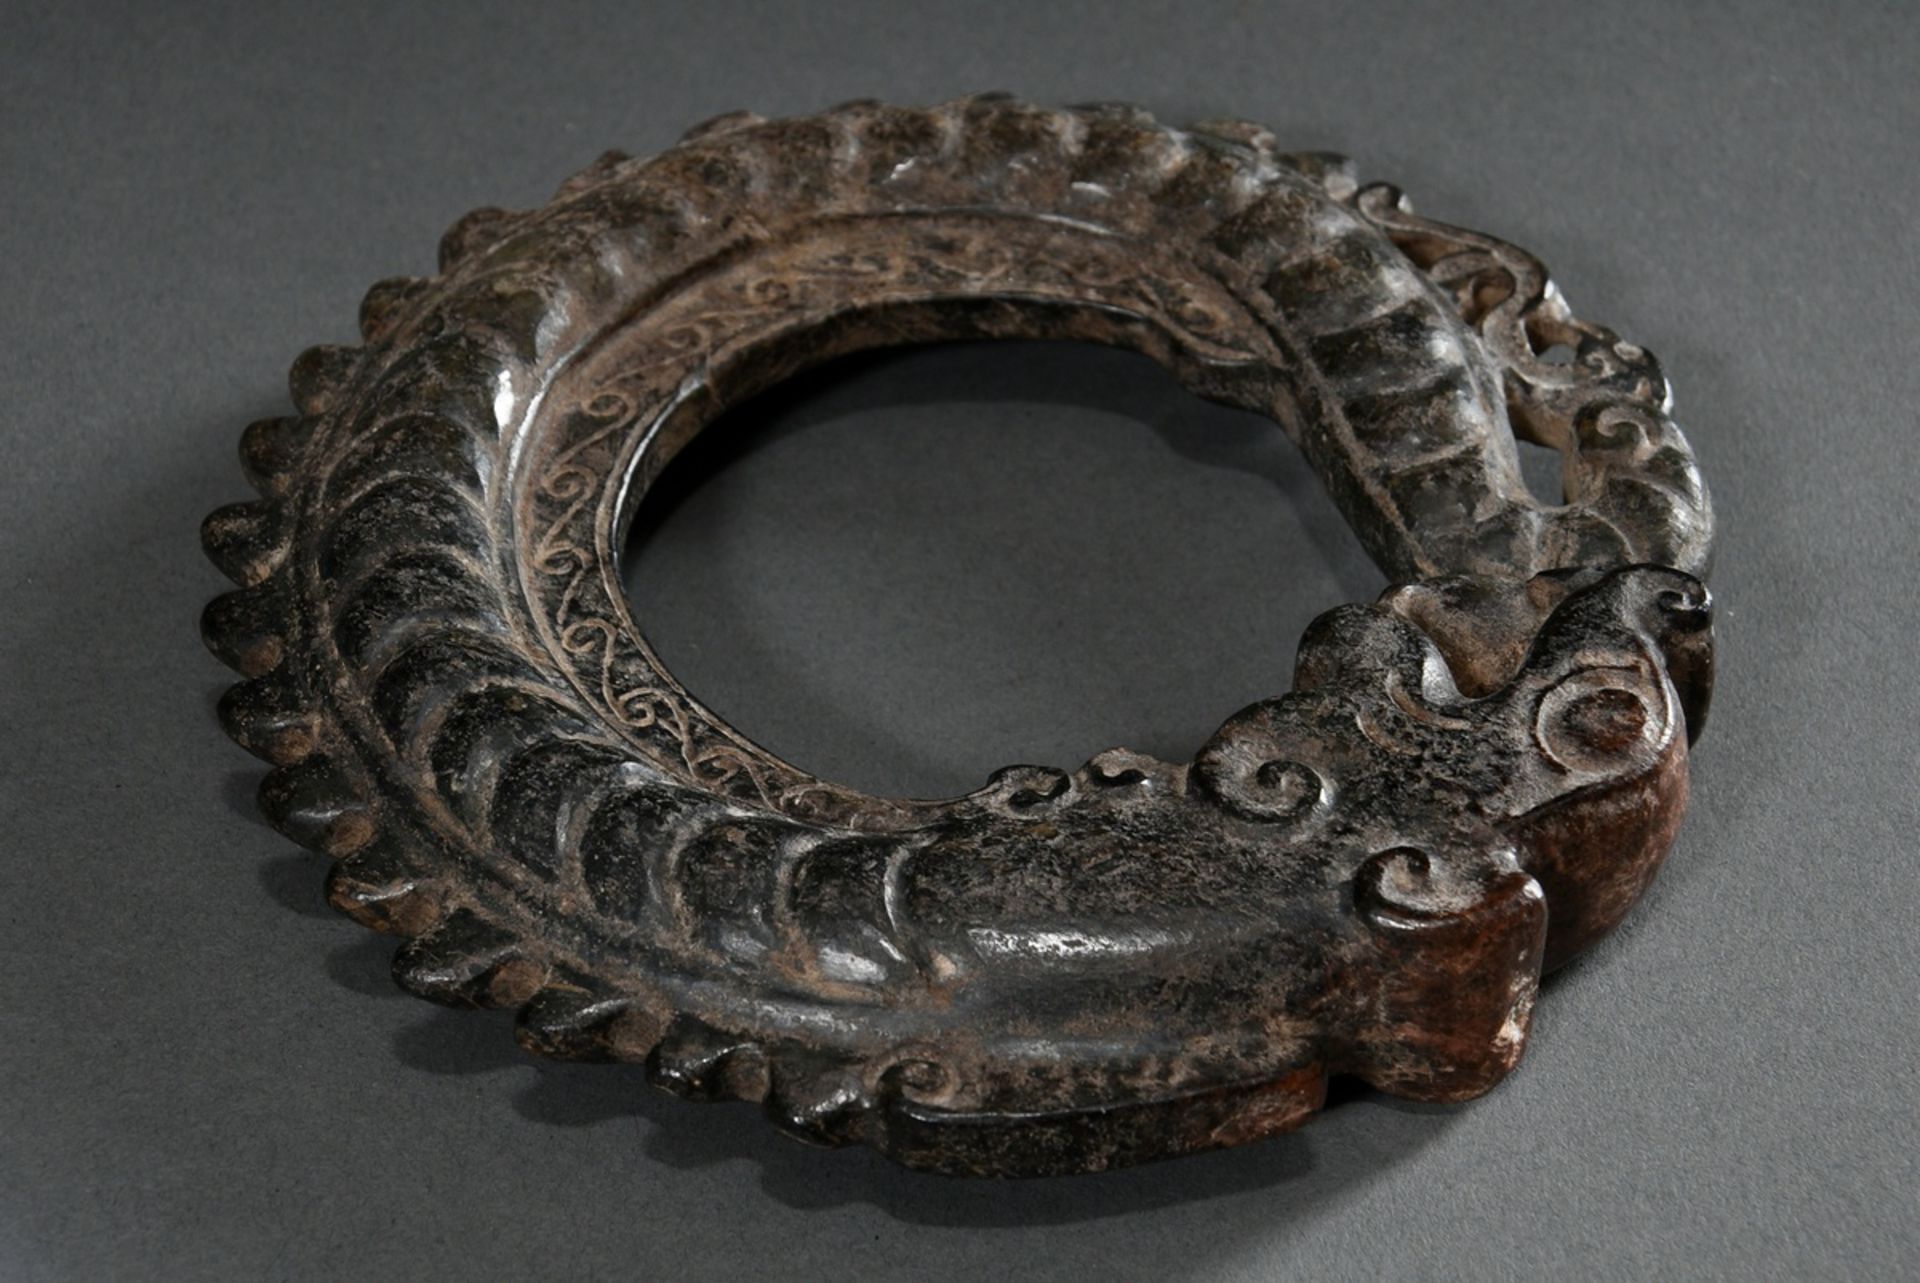 Dark jade carving "Round-laid dragon", powerfully stylised with jagged back and scales, wooden stan - Image 6 of 6